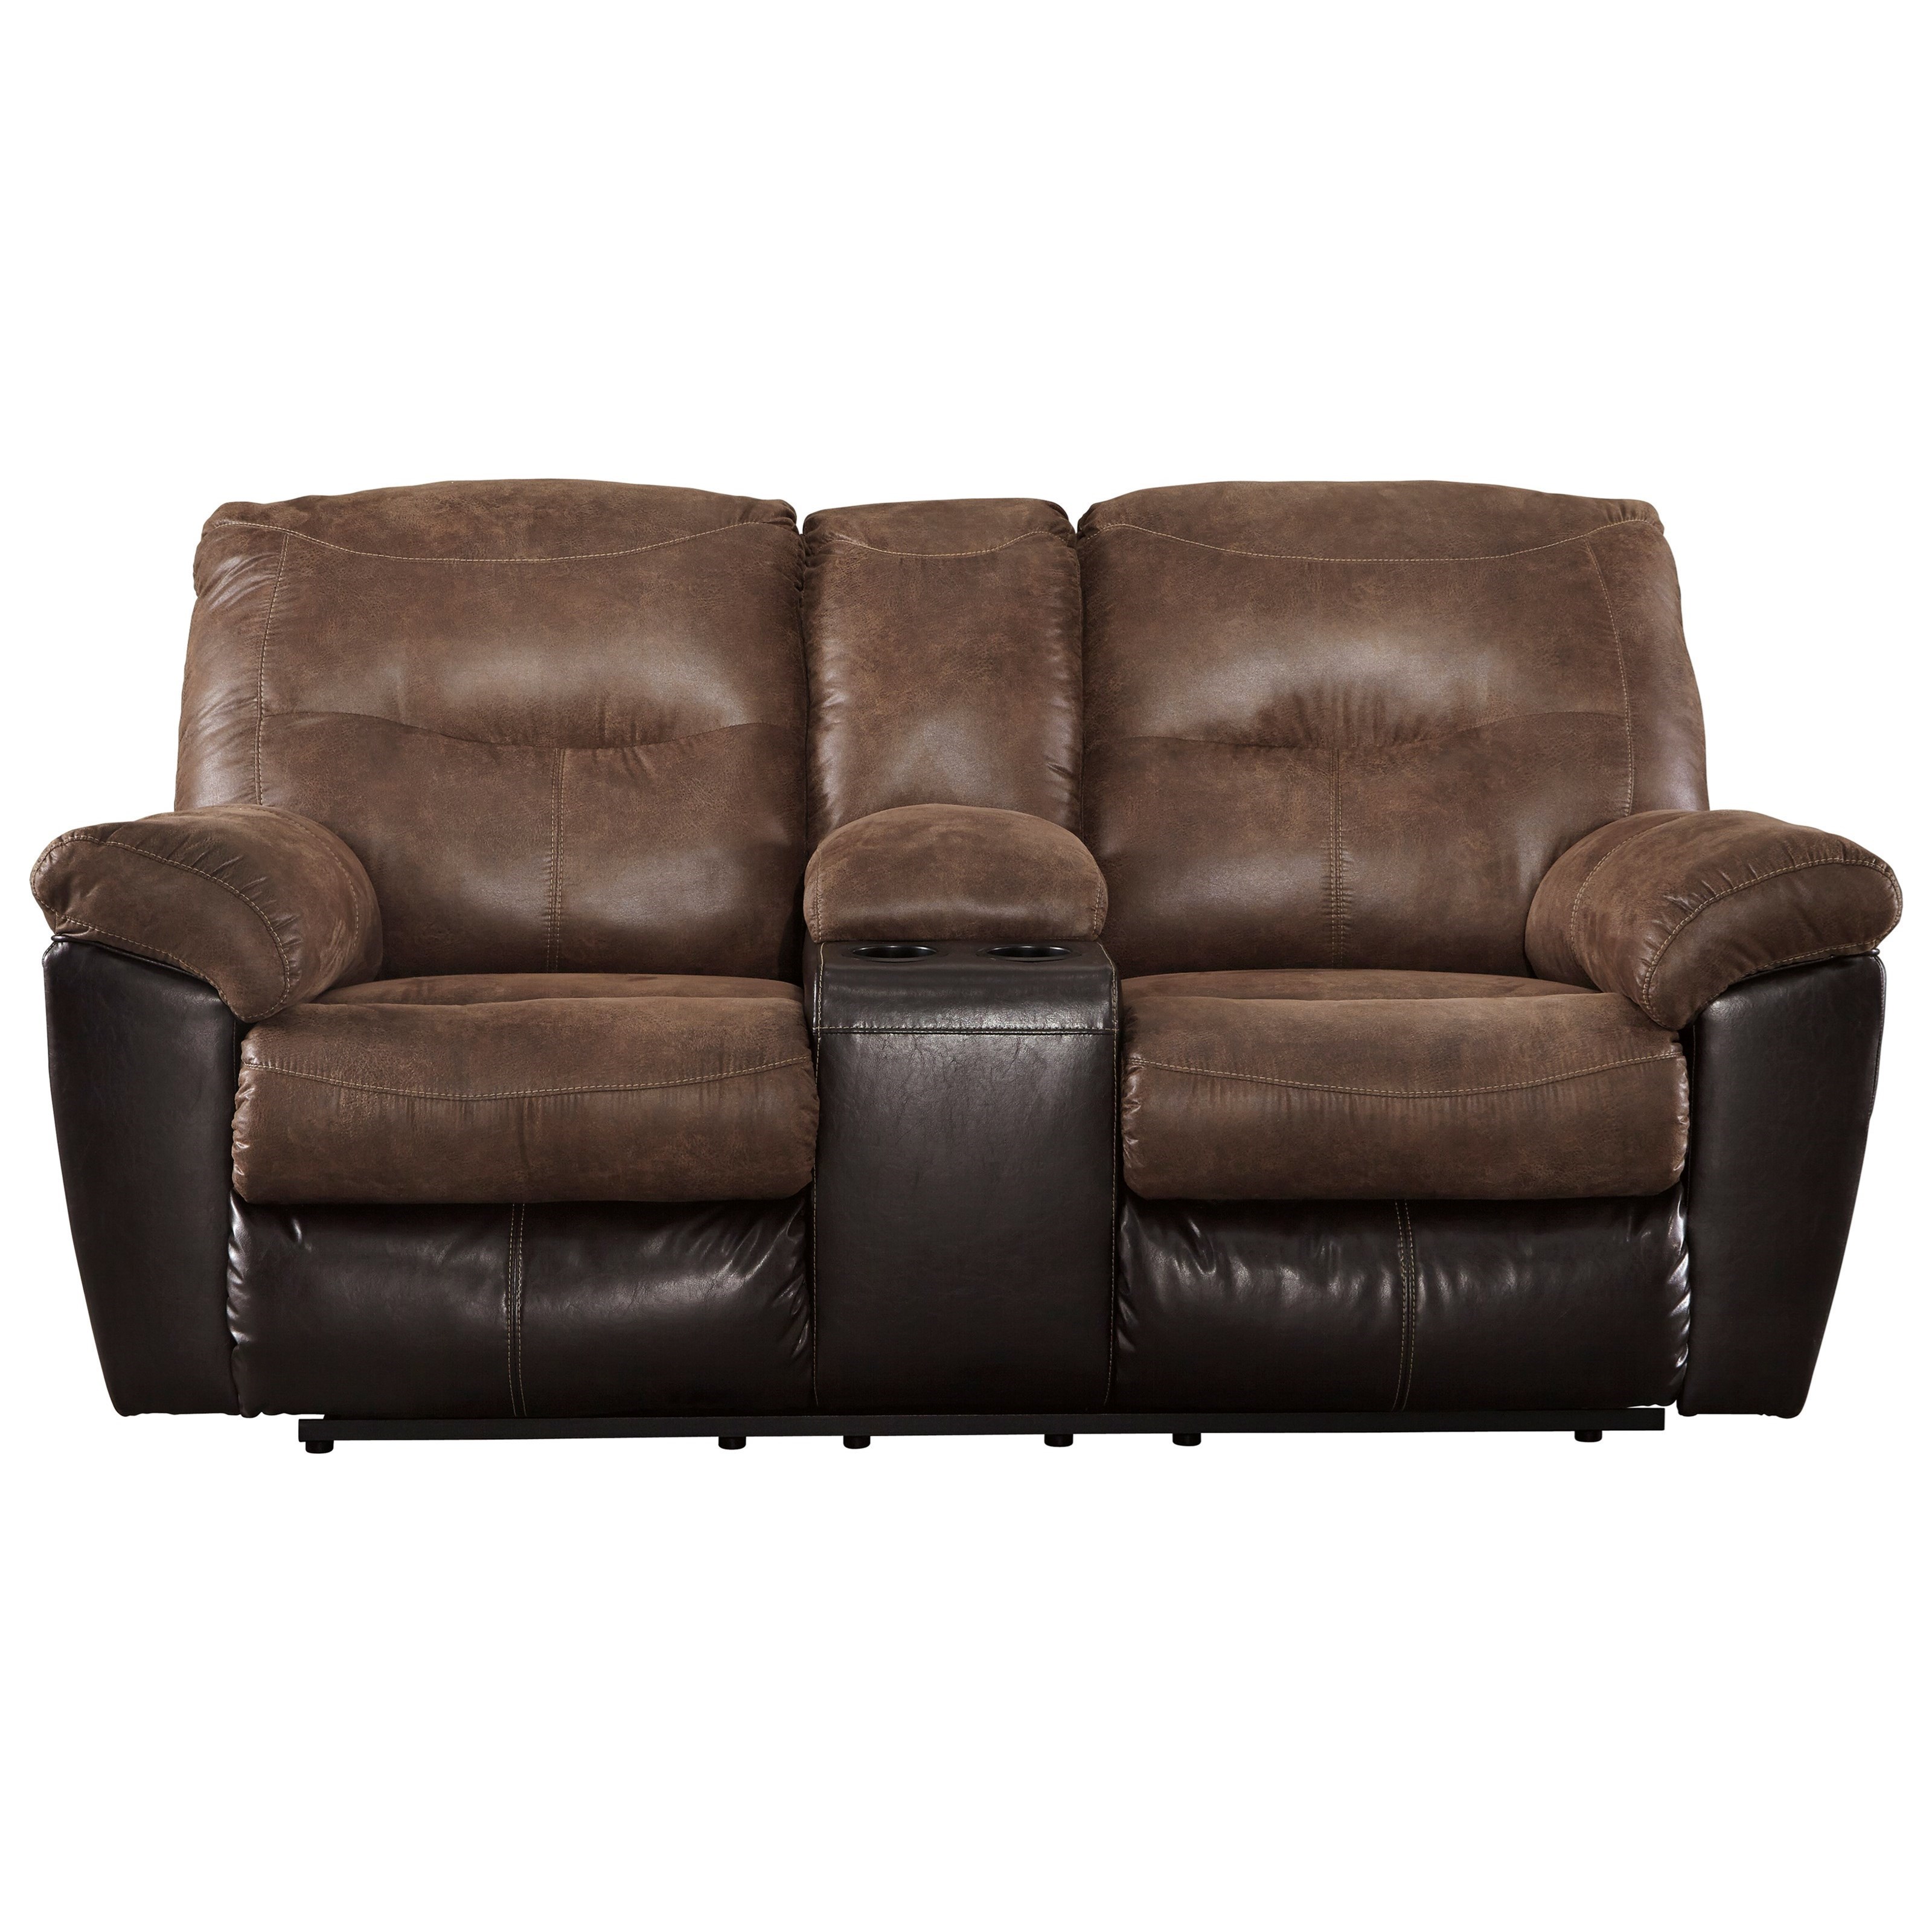 Signature Design by Ashley FollettDouble Reclining Loveseat w/ Console